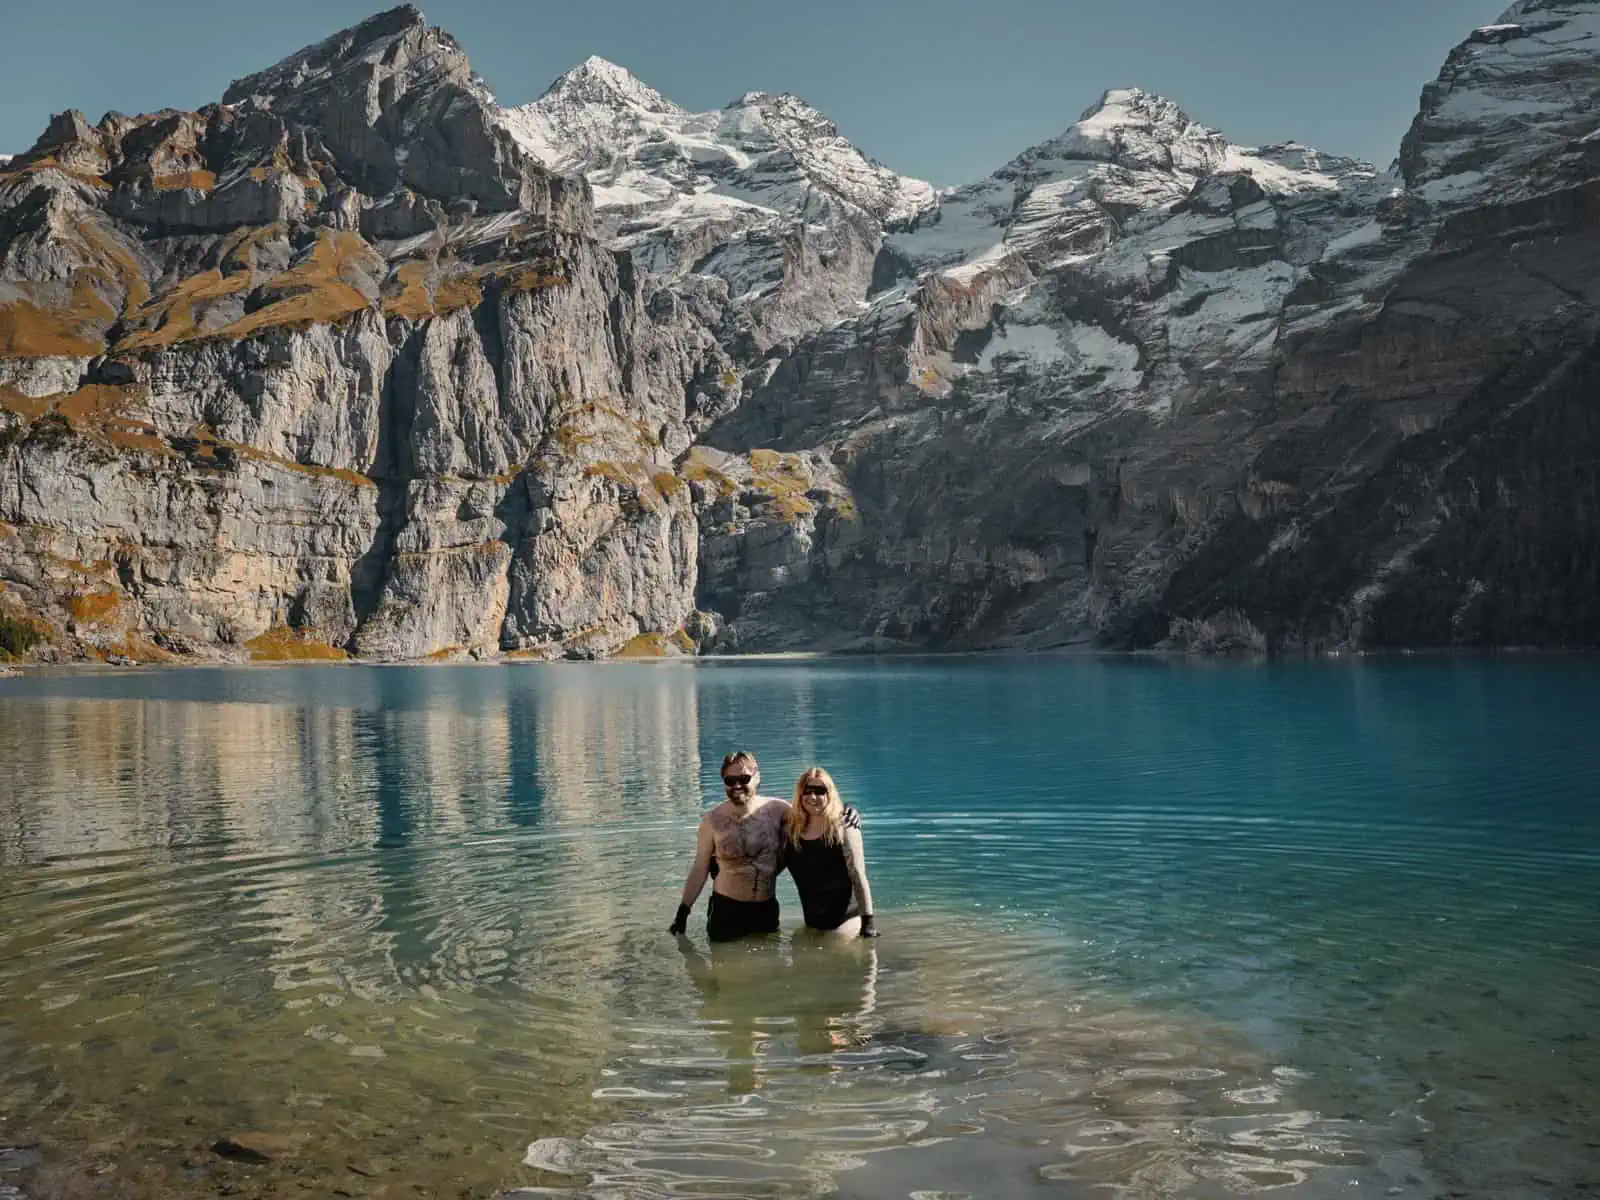 Five Accessible Wild Swimming Locations (with maps) to Try in the Bernese Alps, Switzerland